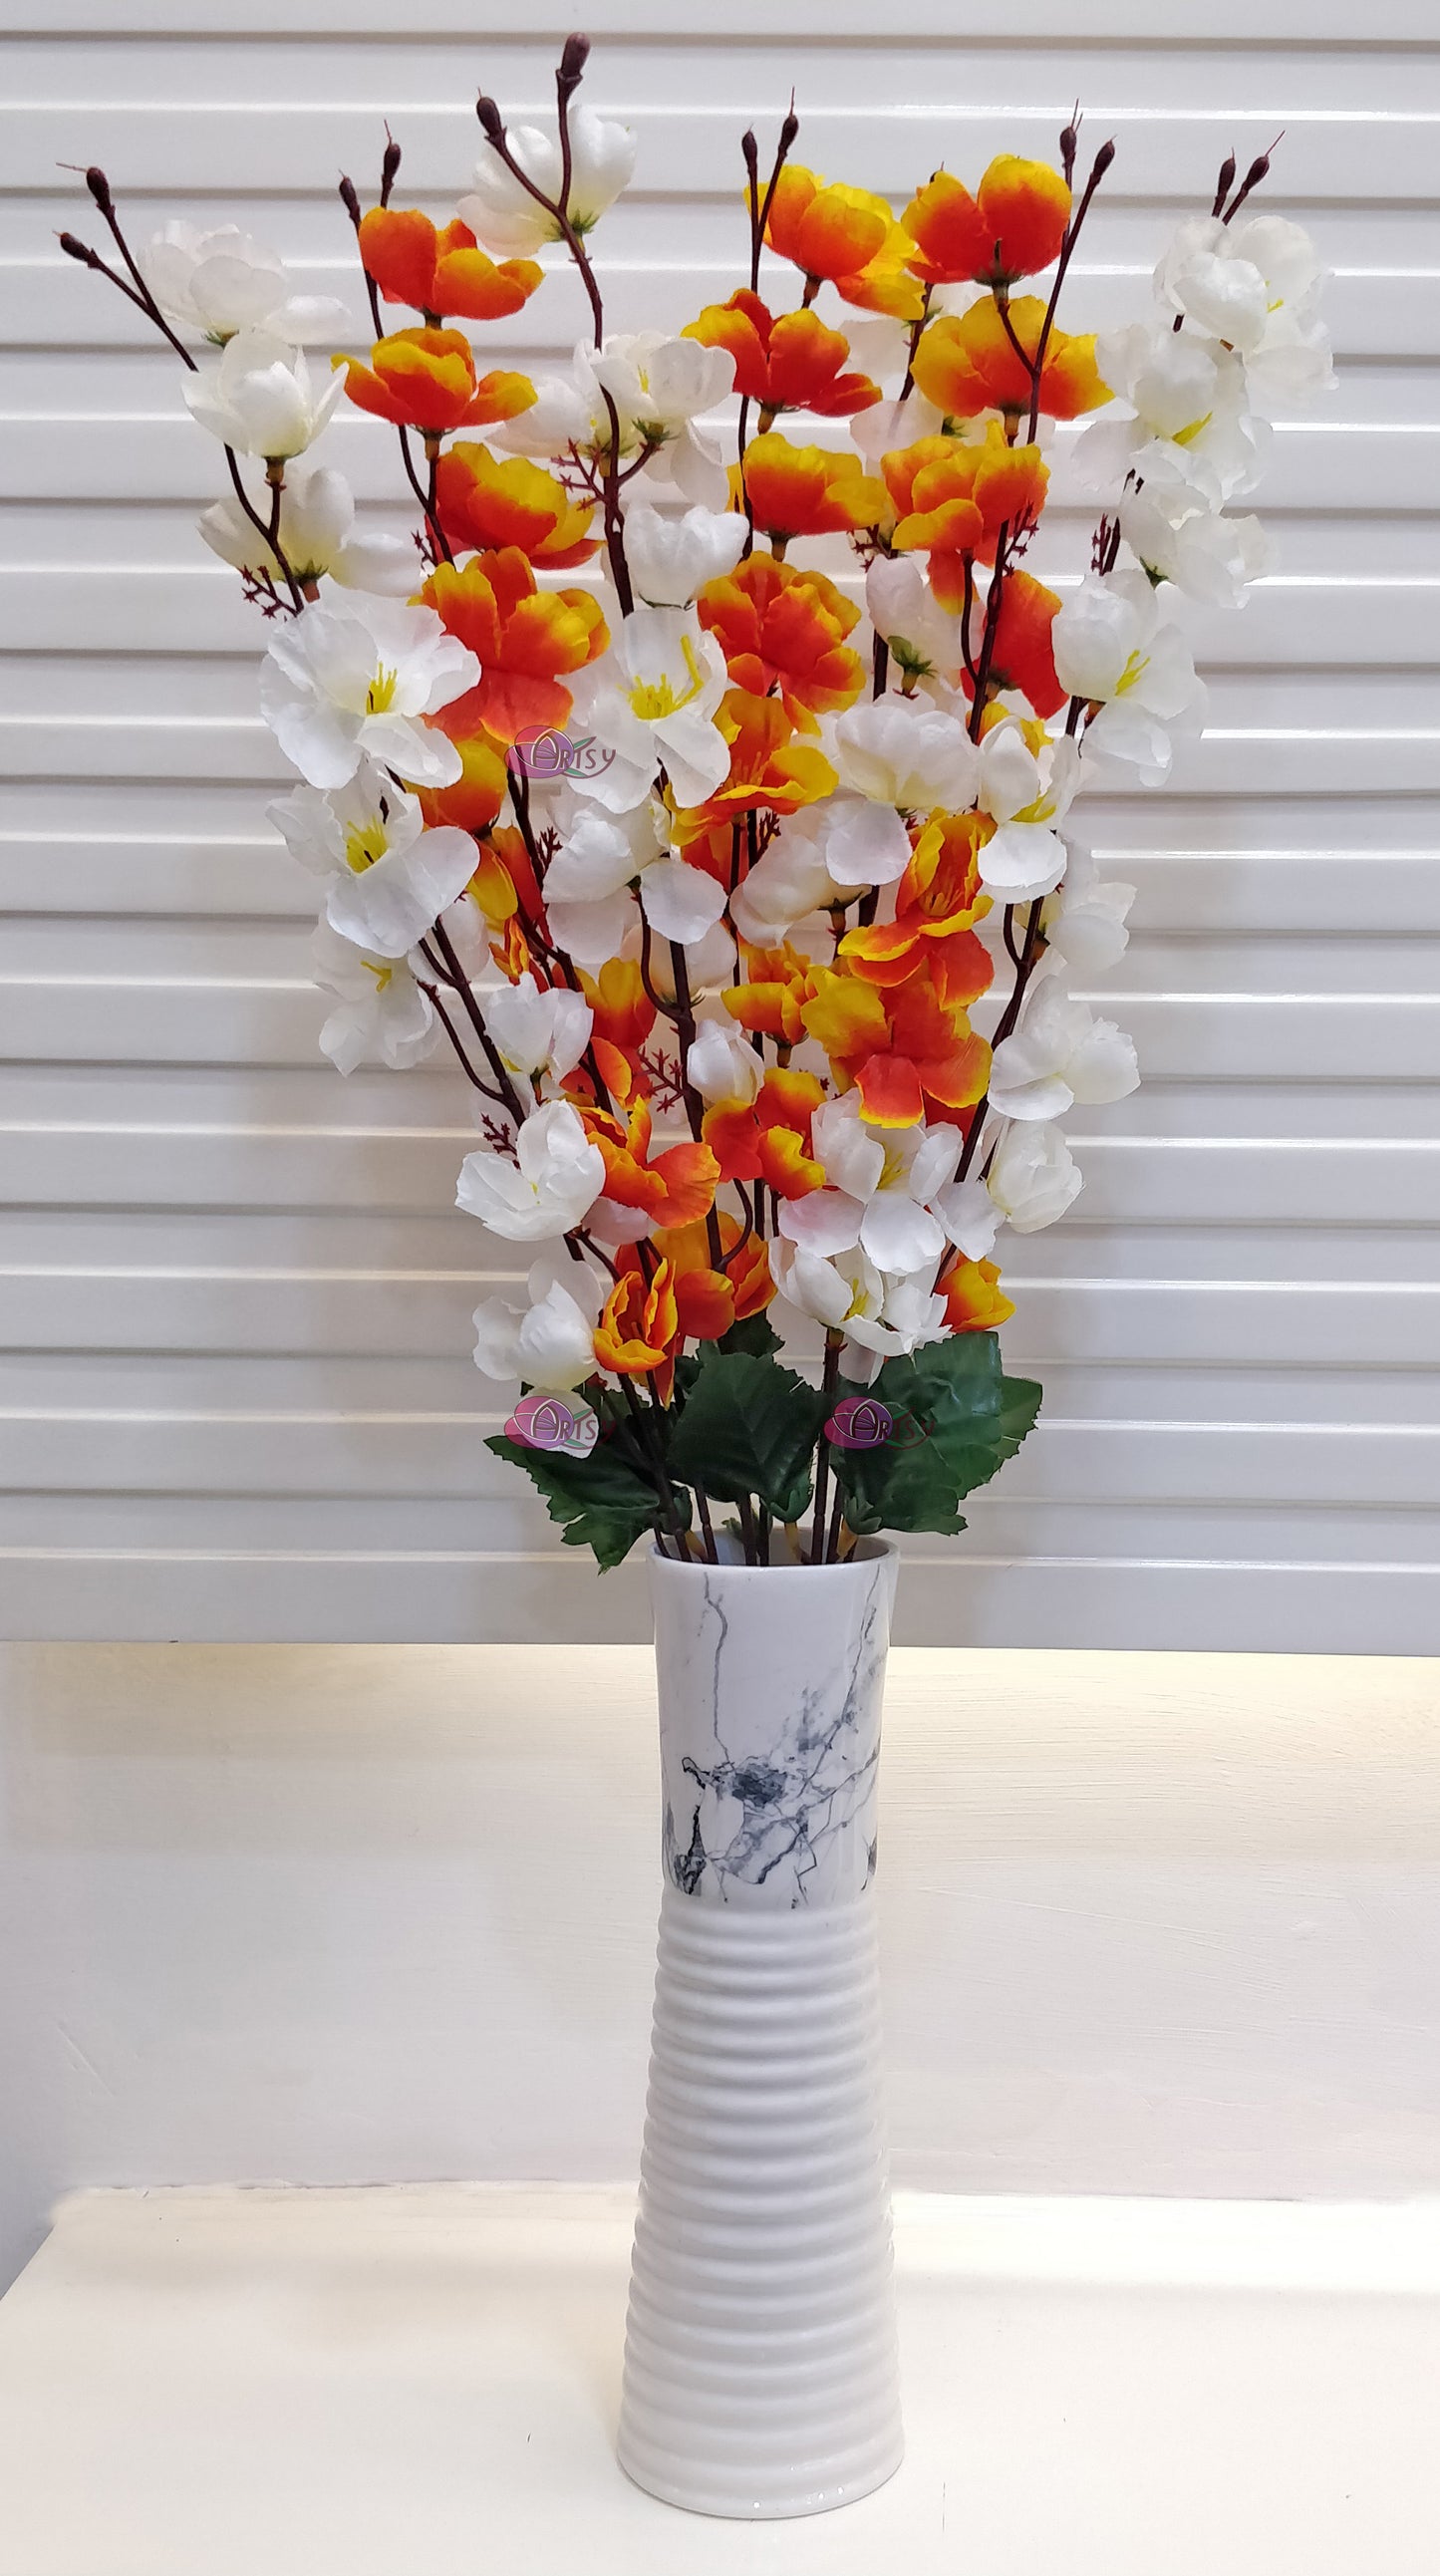 ARTSY® Vibrant Orange and White Artificial Cherry Blossom Flower Elegance, For Home Decoration, Office Decor, Without Vase, 55 Cm Long